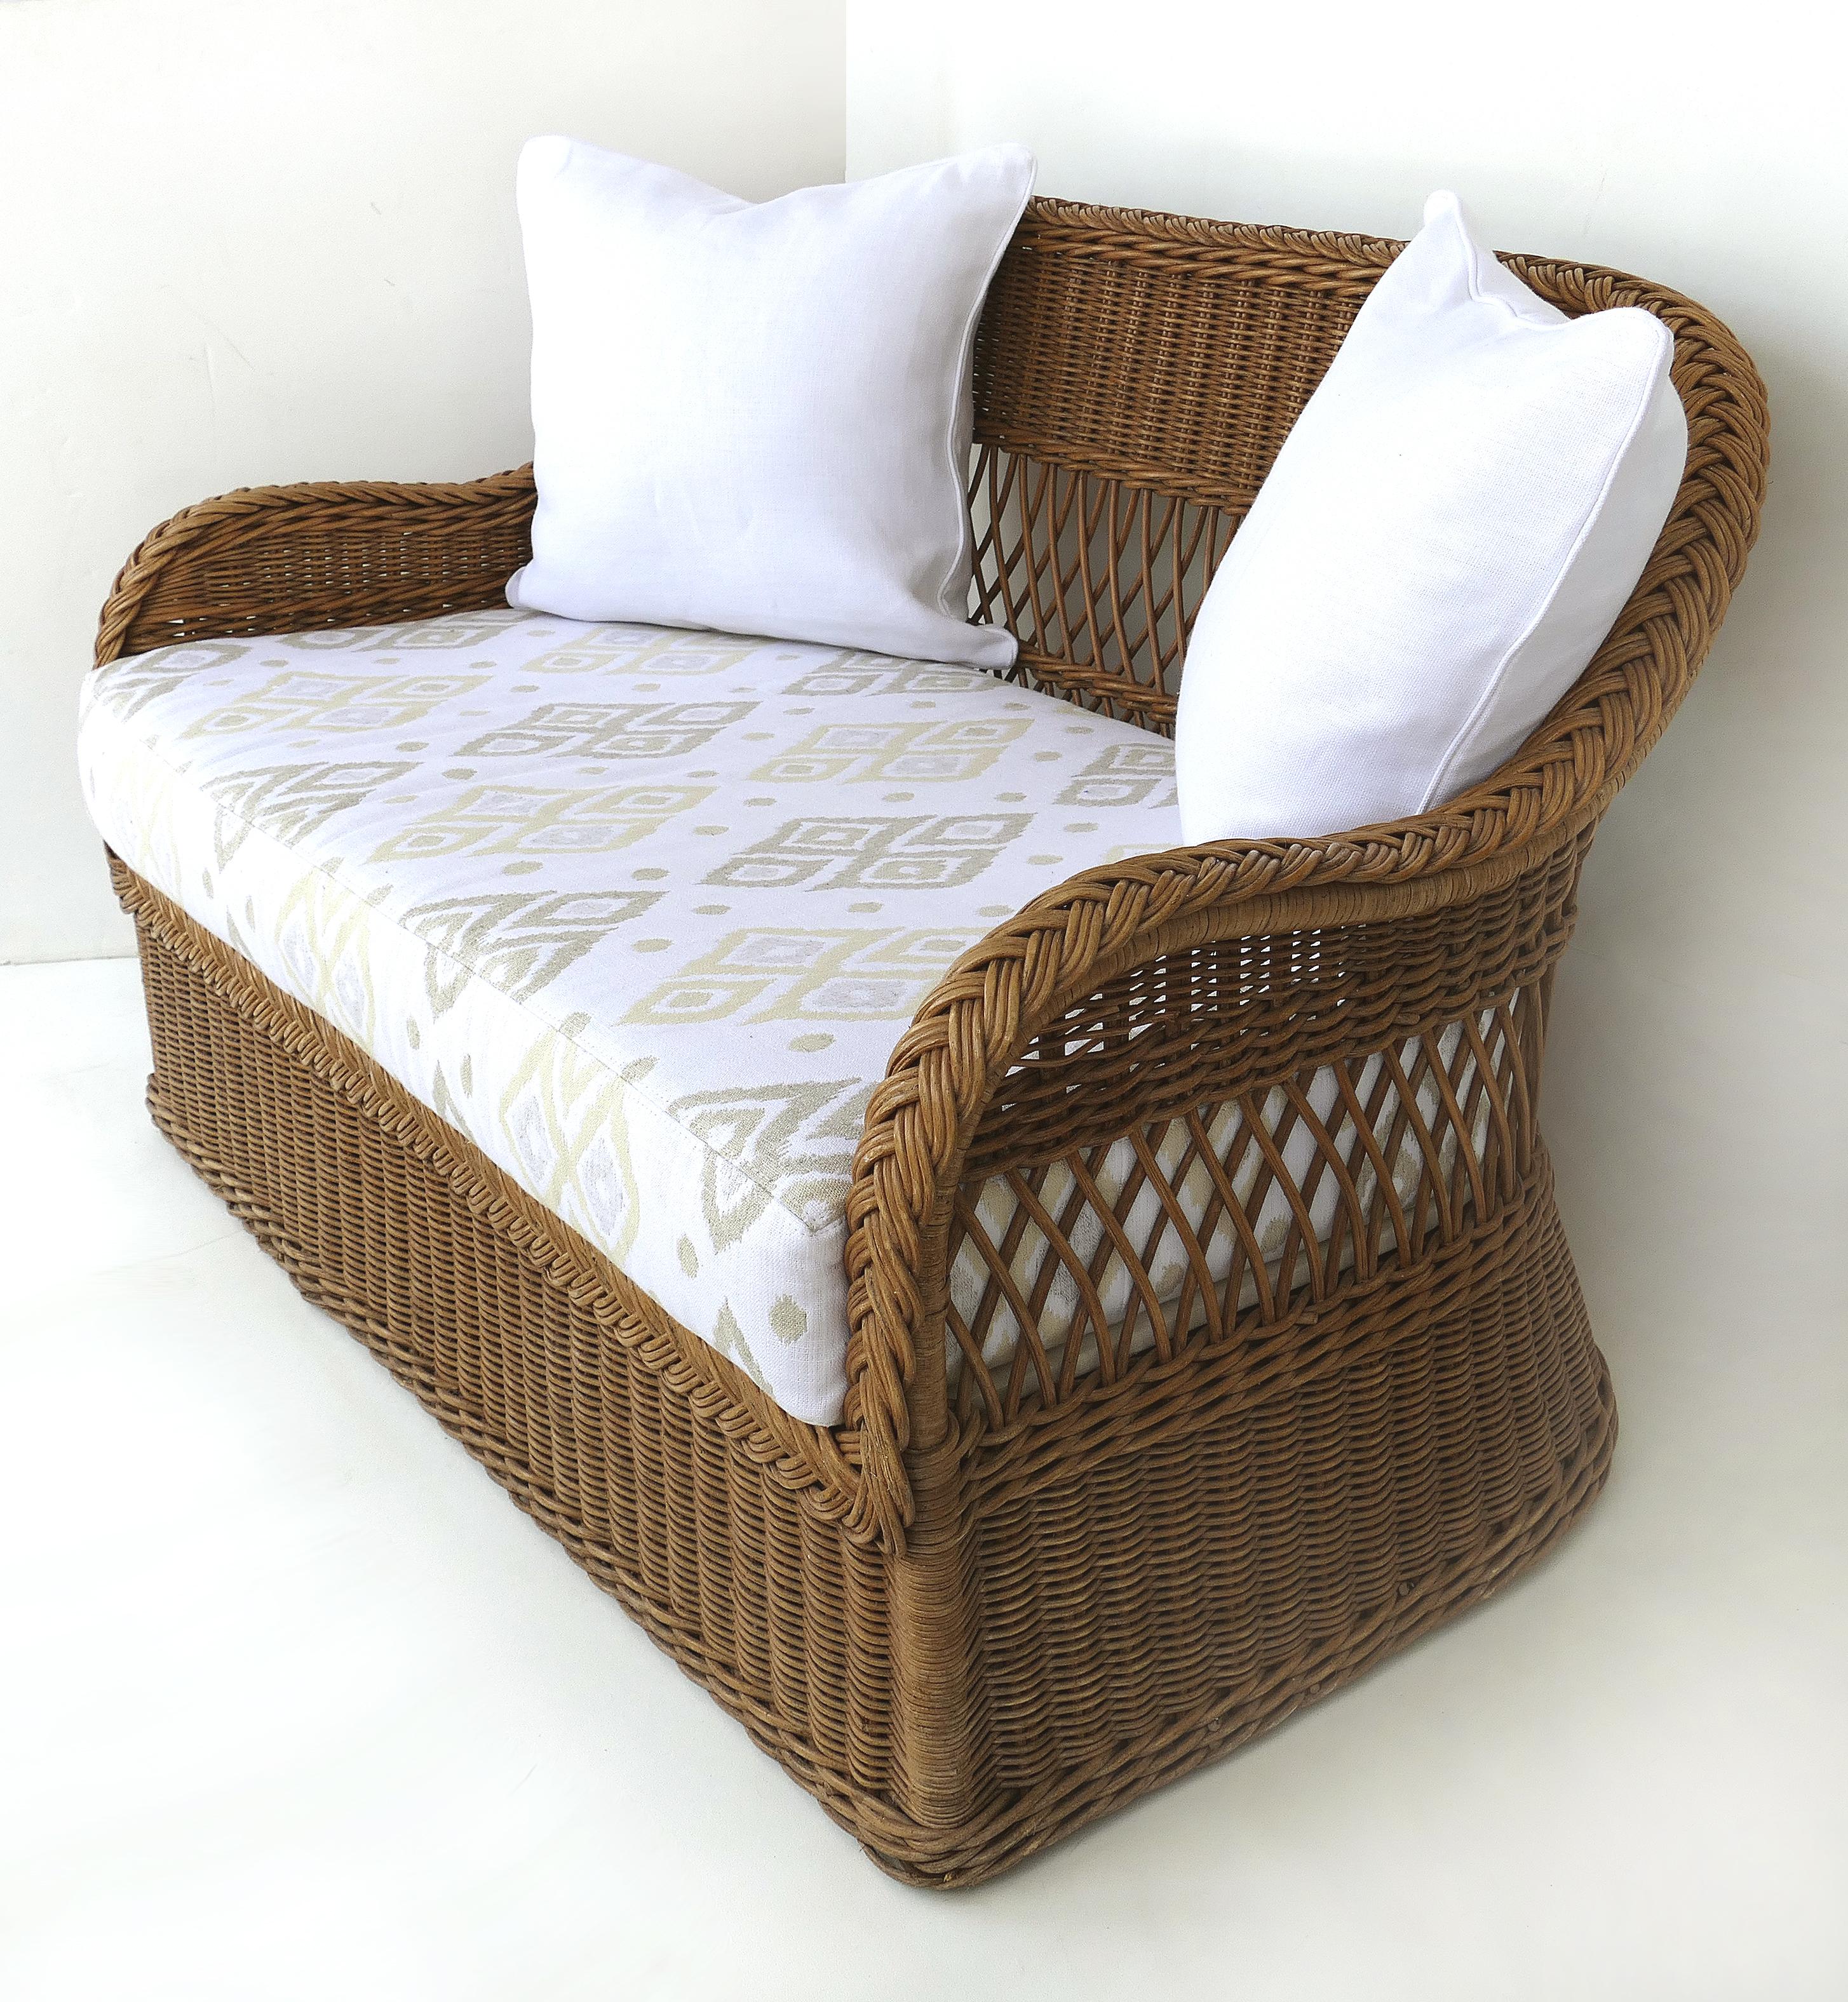 Henry link woven wicker loveseat settee, newly upholstered

Offered for sale is a fine quality Henry Link natural woven wicker settee or loveseat with a loose seat cushion which is newly upholstered. The settee will be accompanied by two square